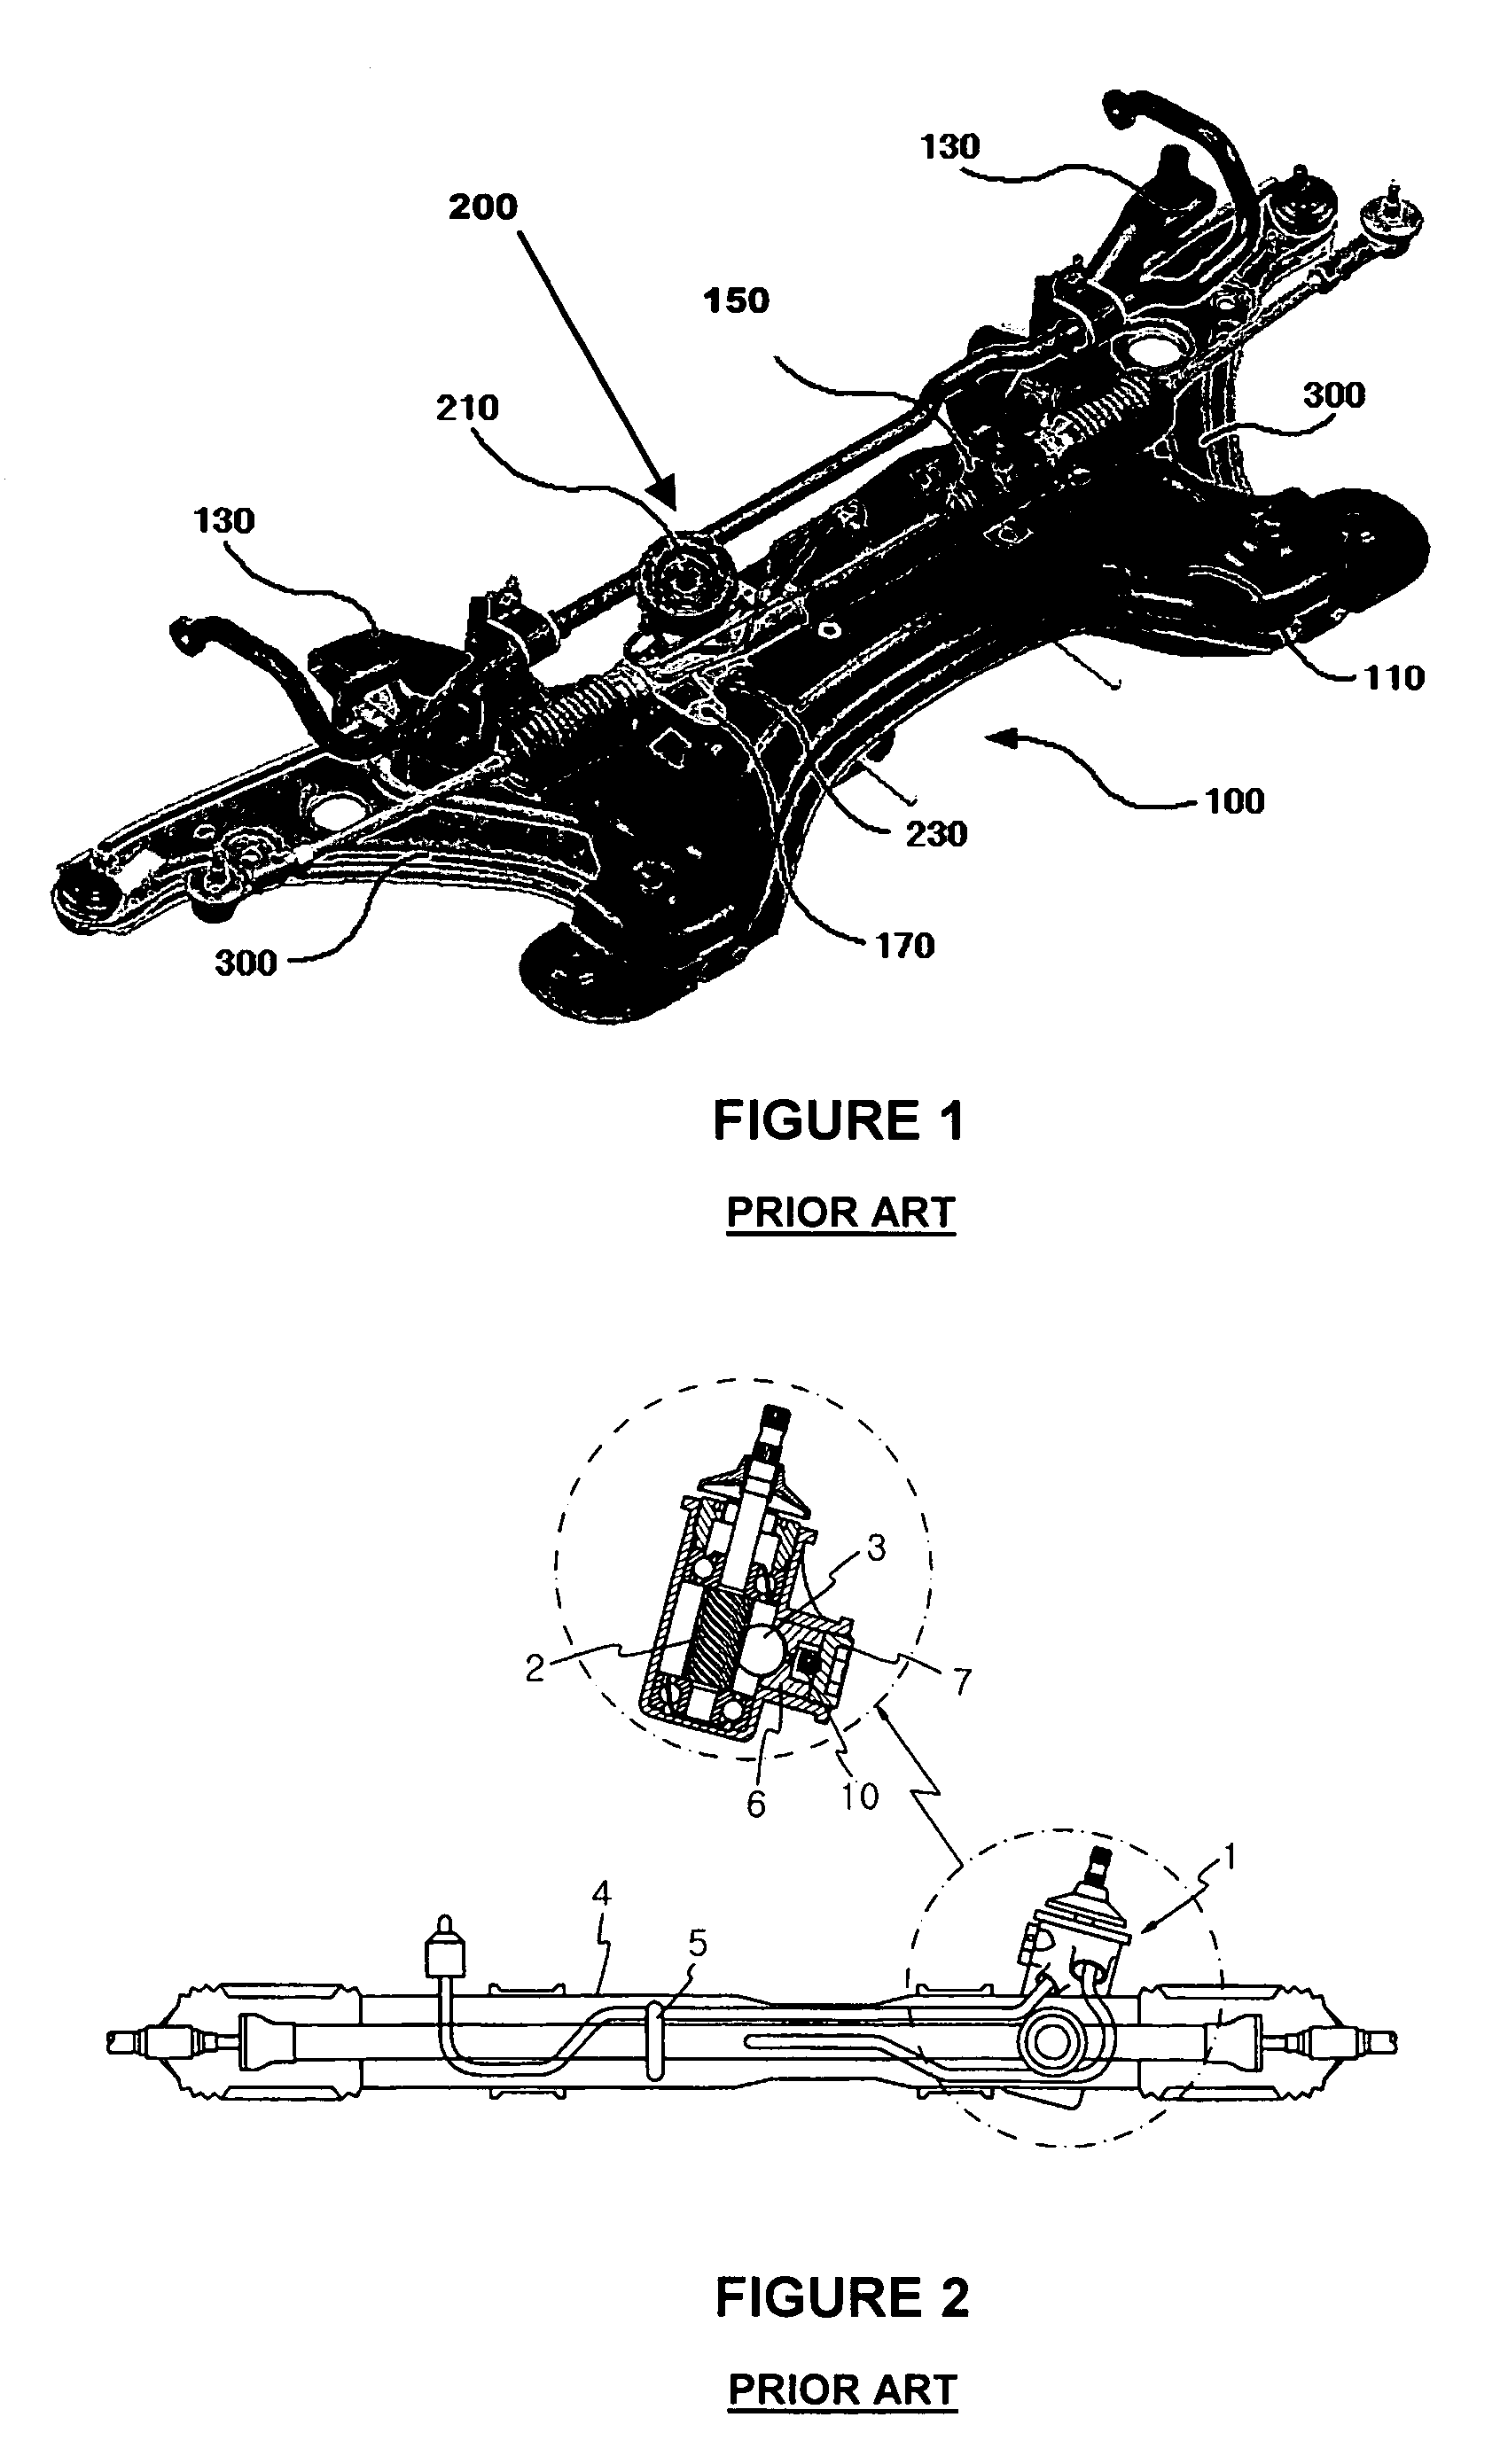 Integrated steering gear and frame structure